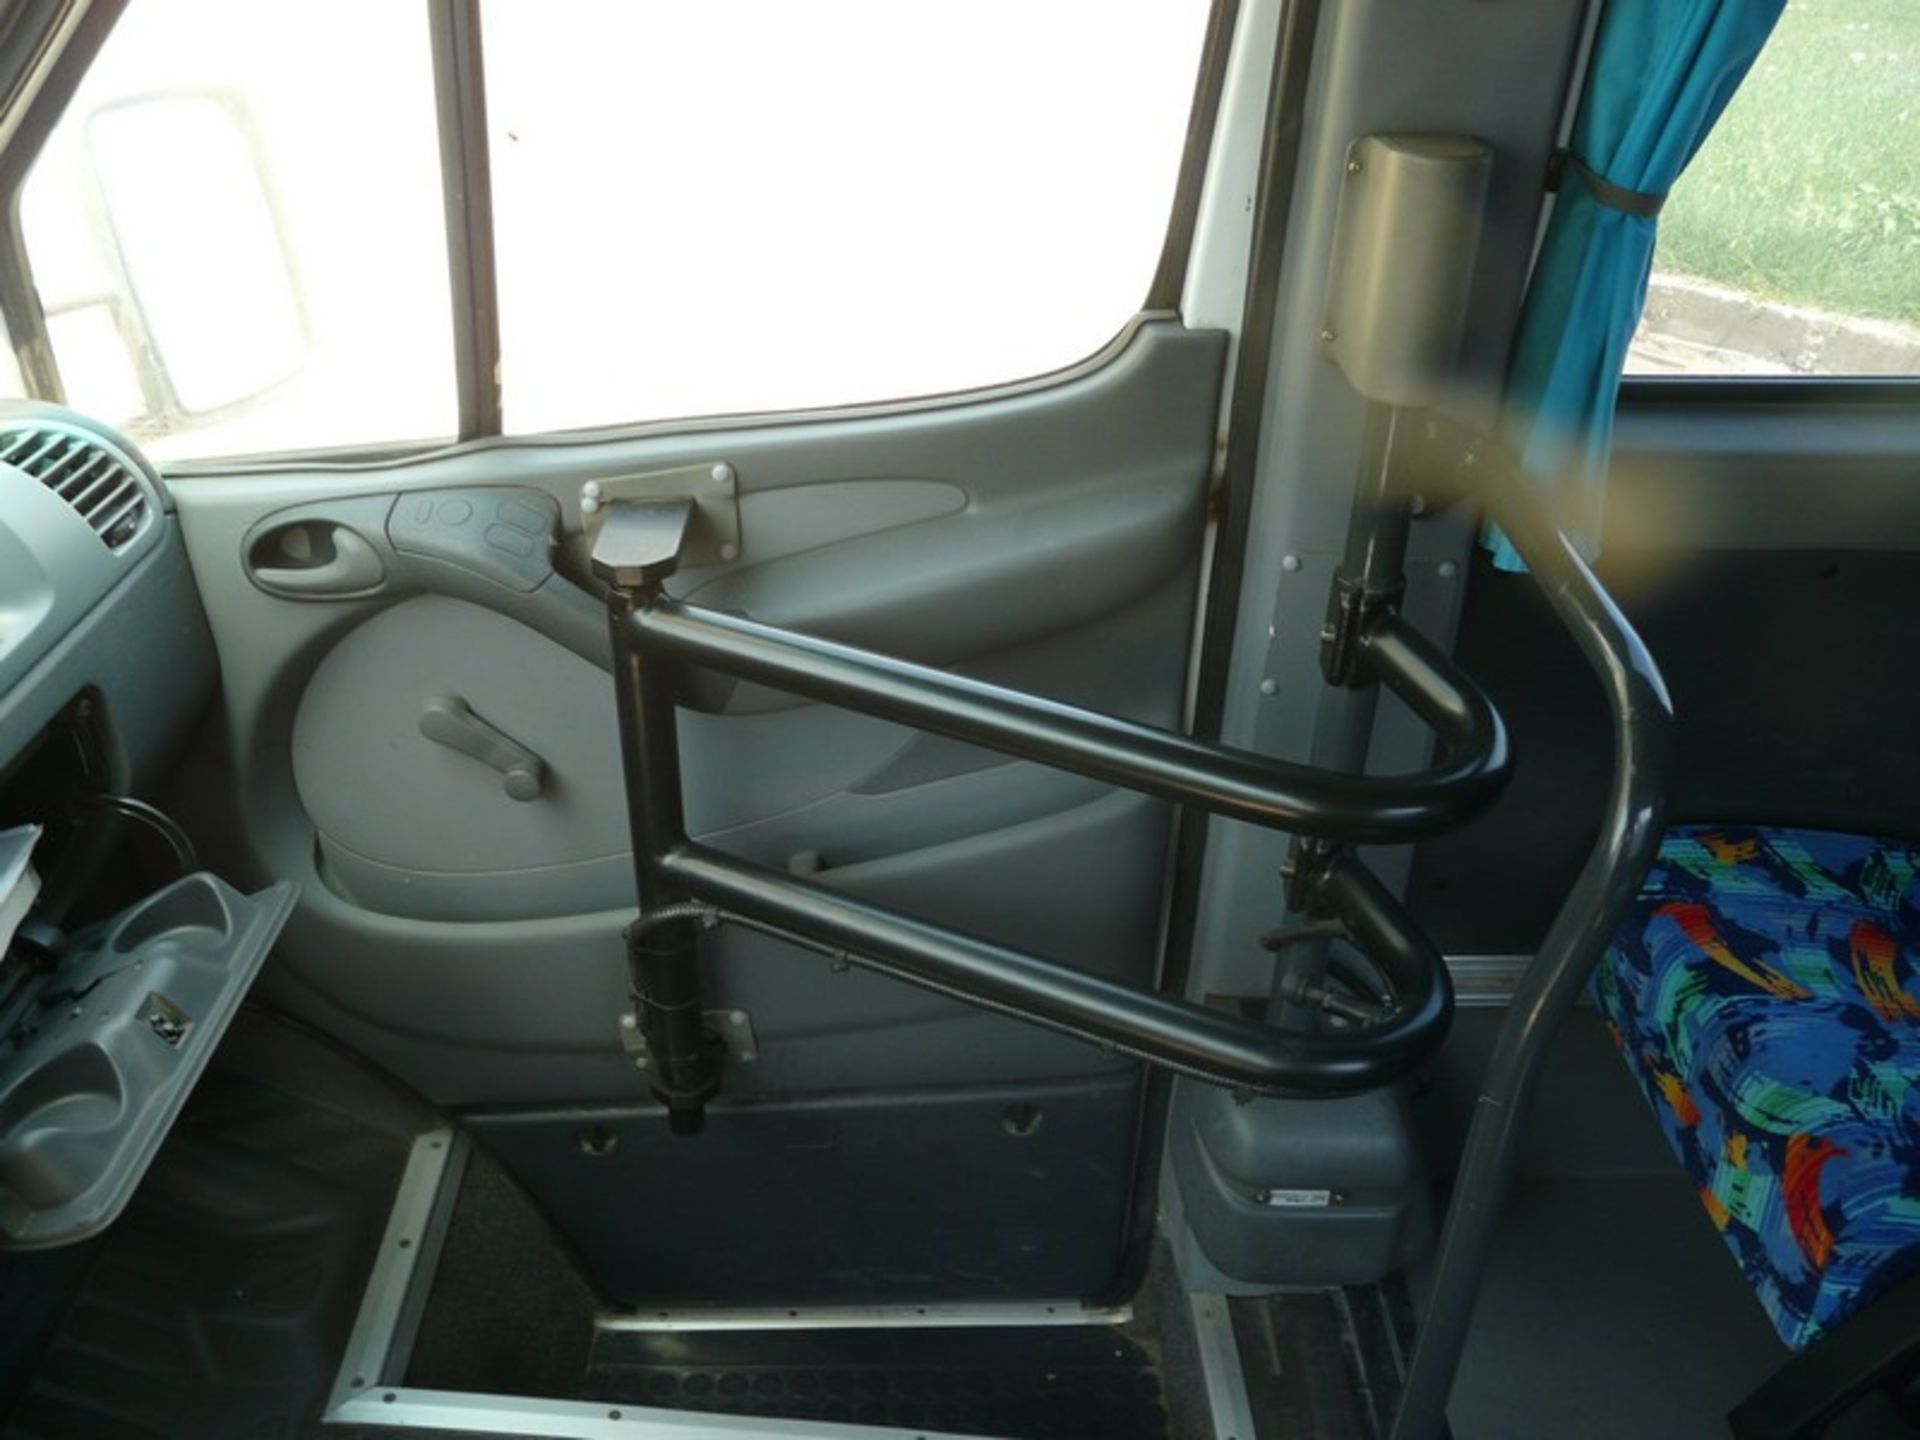 MERCENDES SPRINTER BUSS 16 SEATS ,5 GEAR , WITH AUTOMATIC DOOR , KM : 216710 , REG NZM 4876 ,Y.O.M - Image 9 of 13